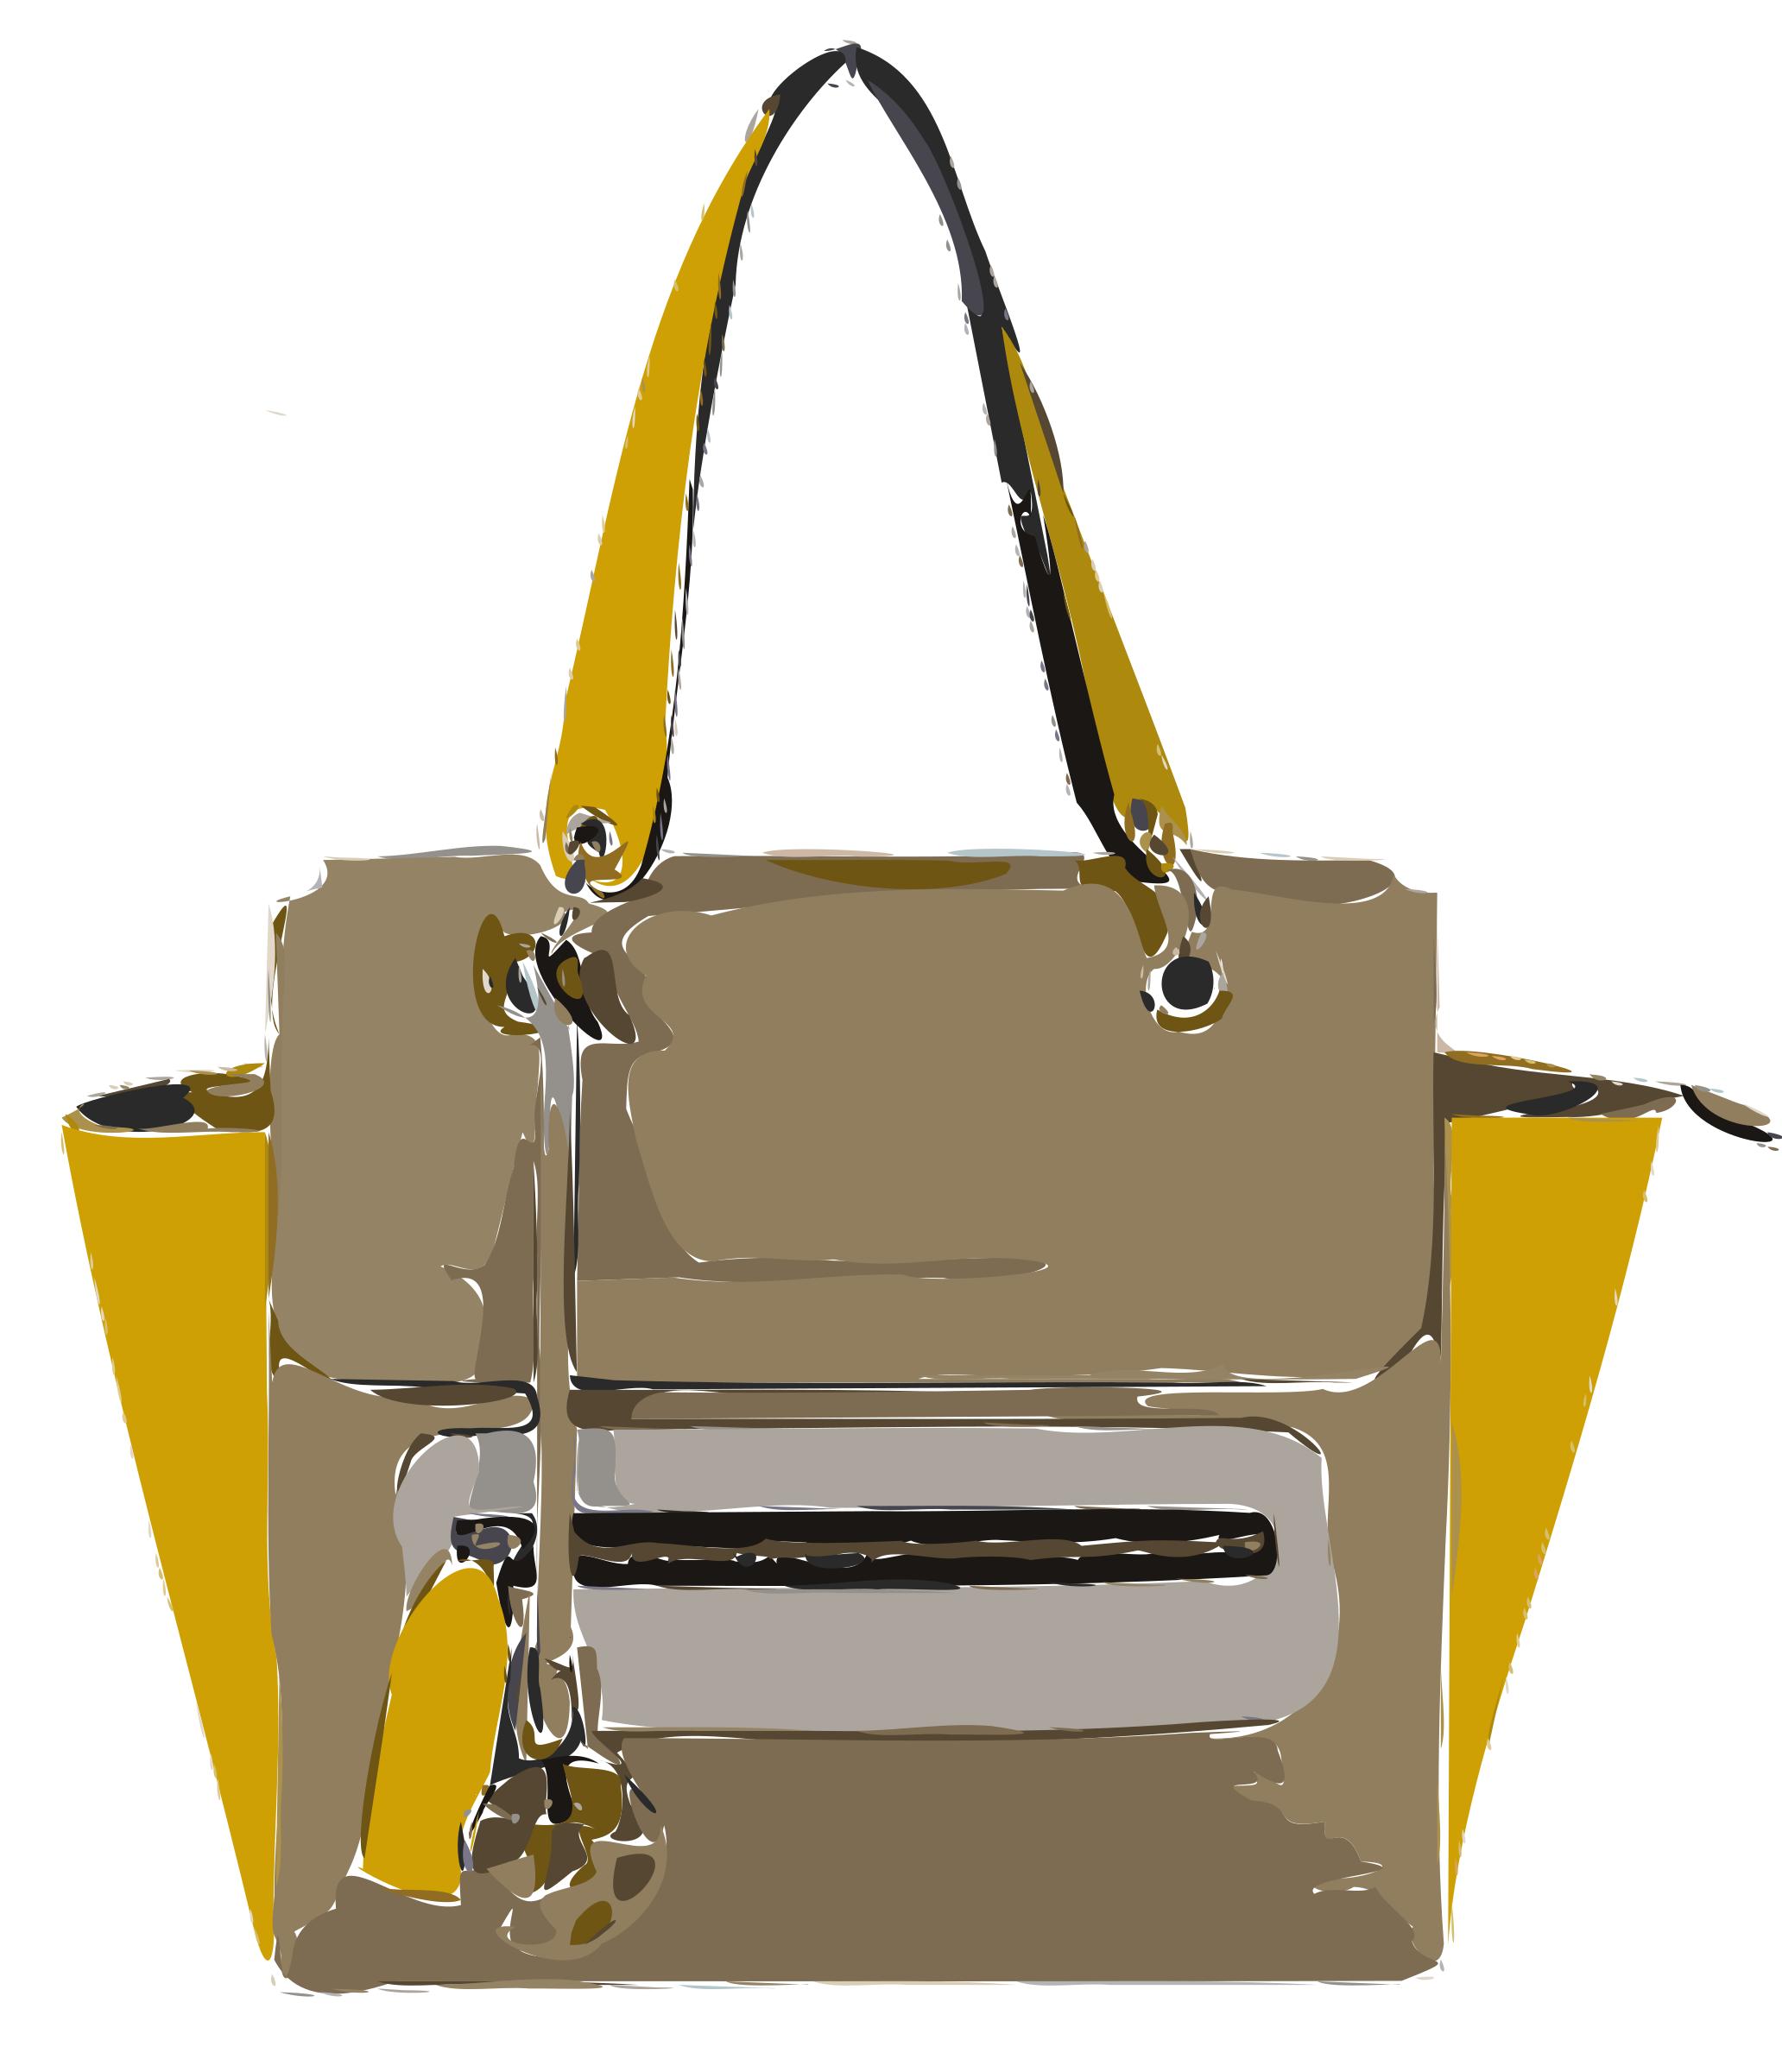 Funky Tan Yellow Bag without Logo png